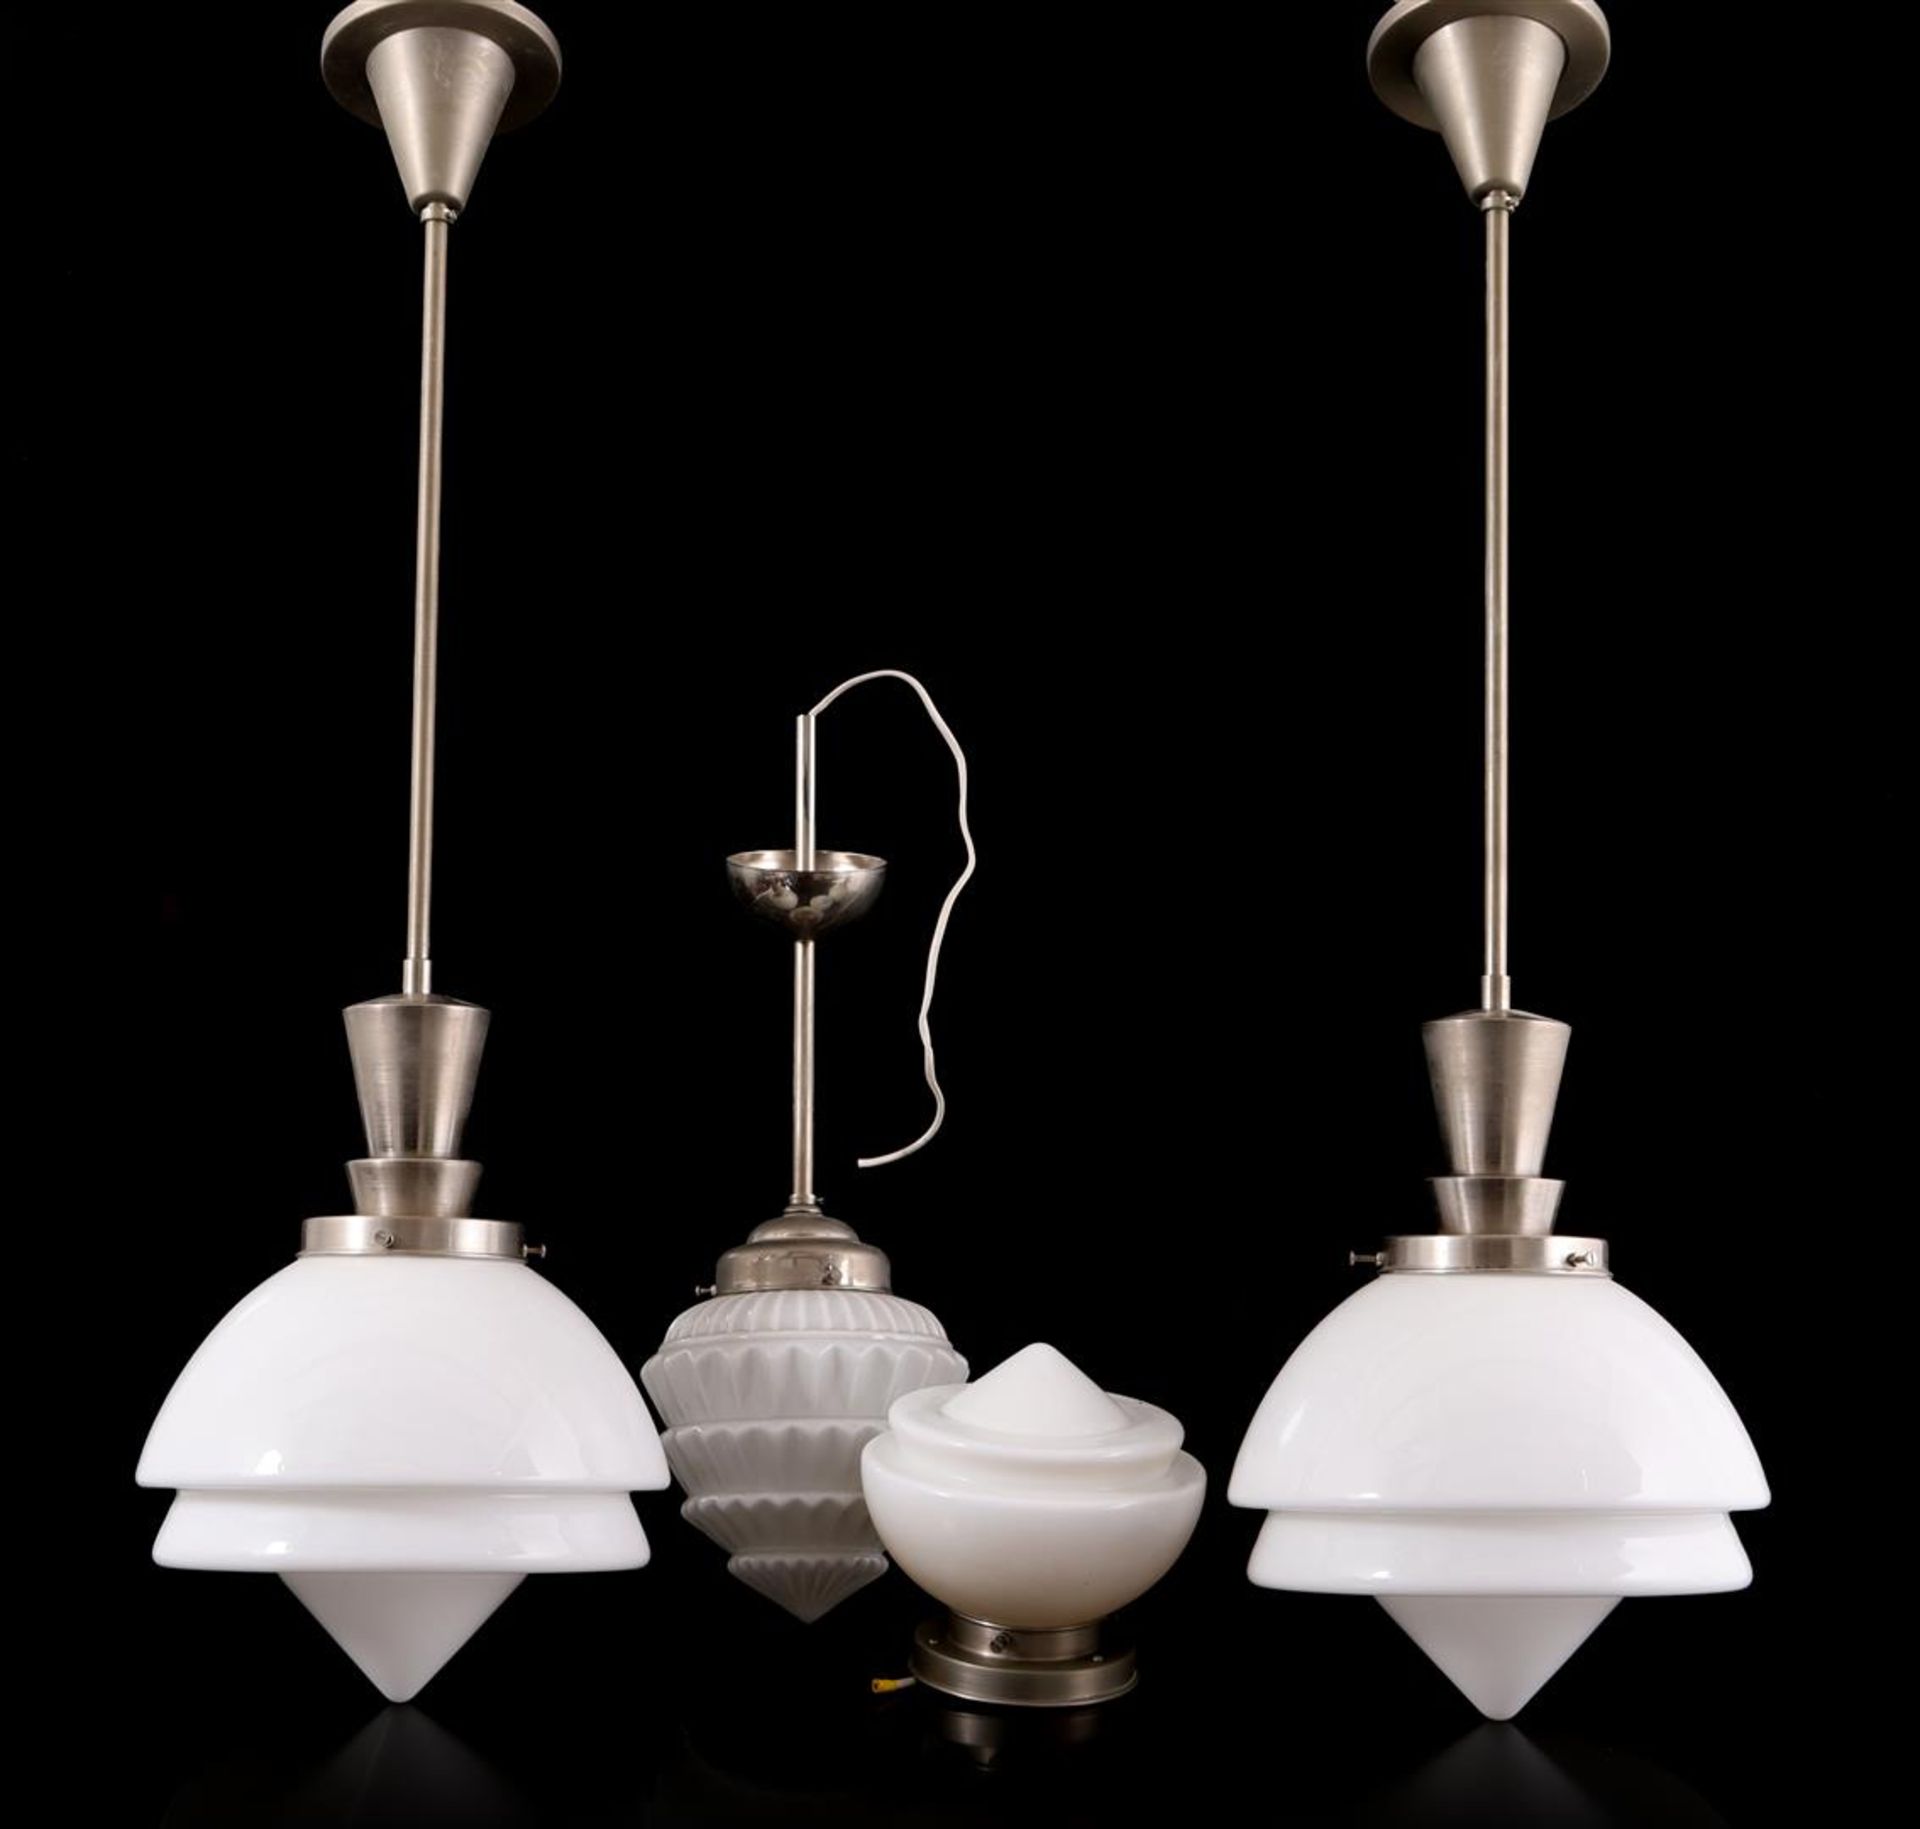 2 metal hanging lamps with opaline glass shade